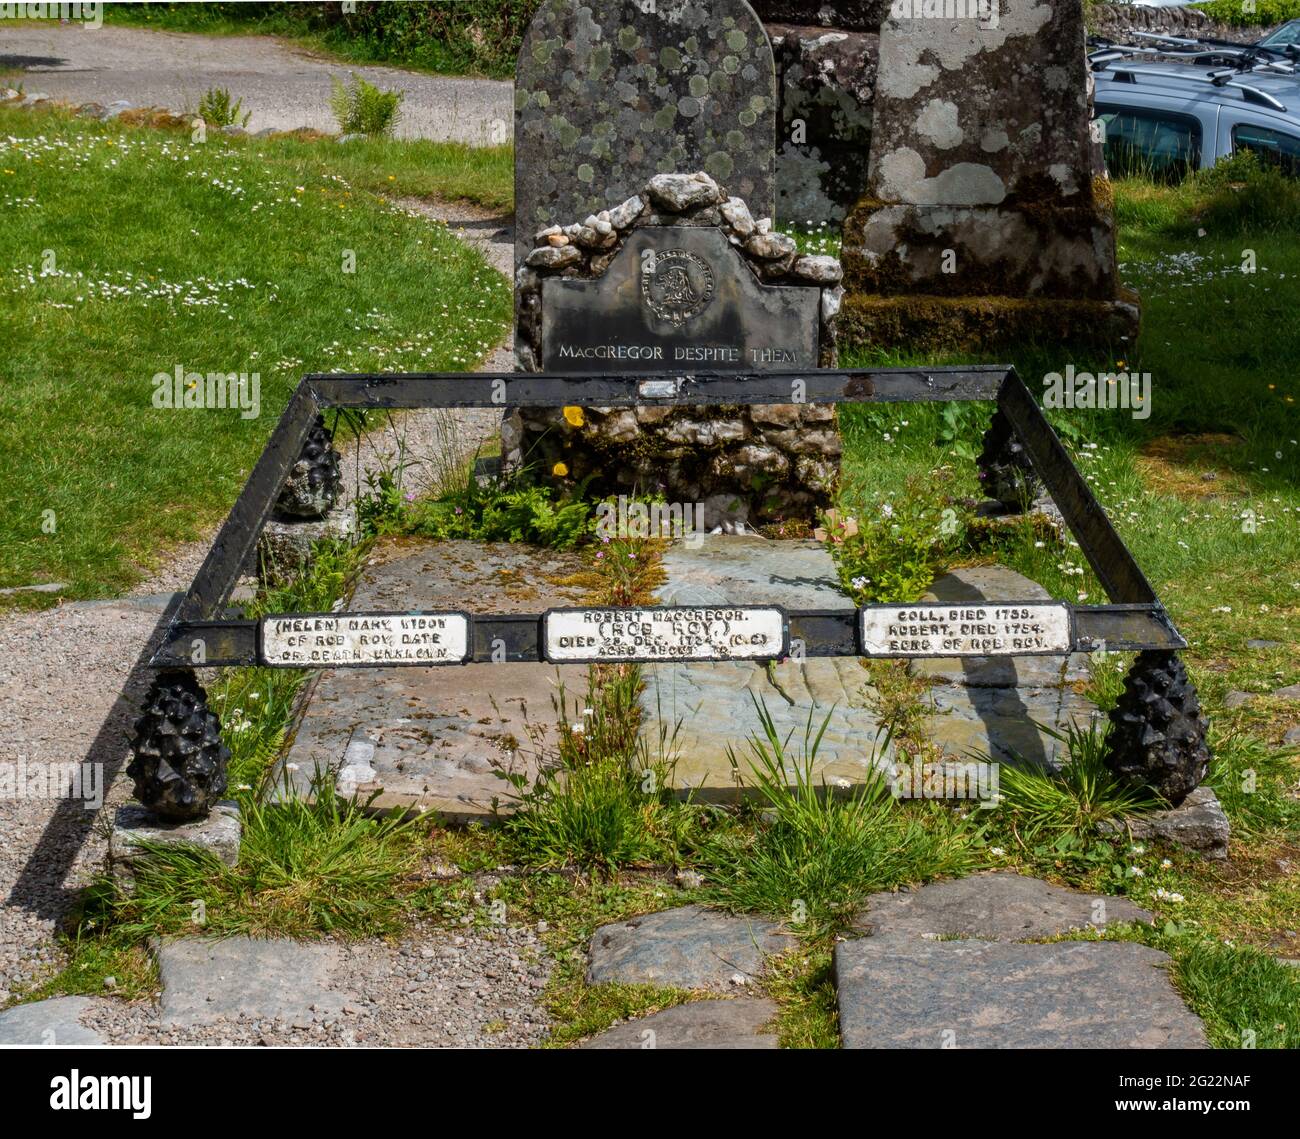 The grave of former outlaw and folk hero Rob Roy MacGregor at Balquhidder, Scotland Stock Photo